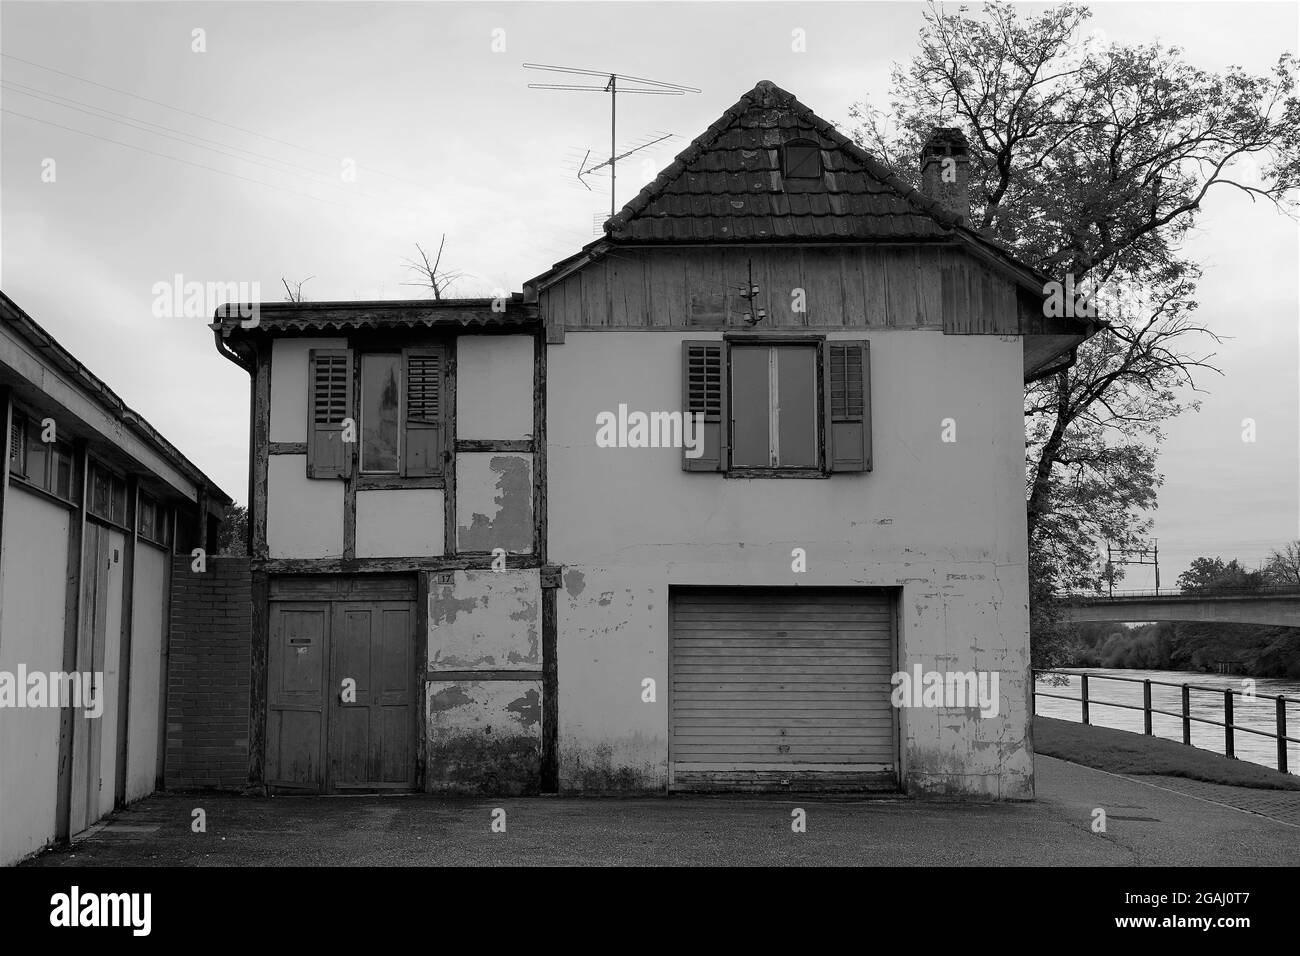 Old abandoned house on the bank of river Aare in Aarburg, Switzerland. There is an analogue aerial on the roof. Photo in black and white. Stock Photo